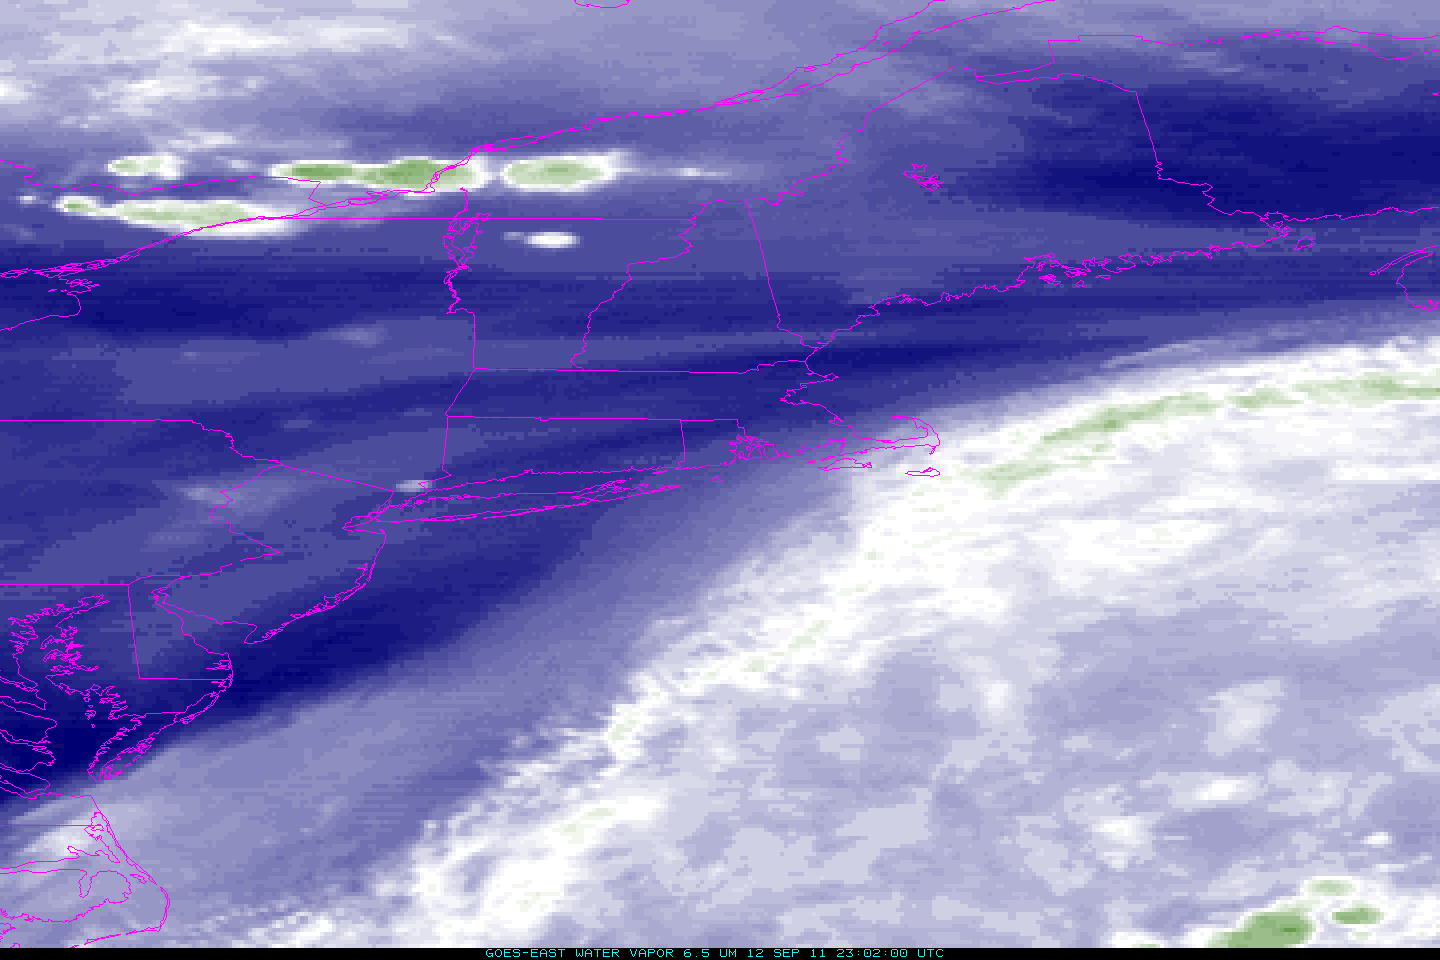 GOES-13 6.5 Âµm water vapor channel images (click image to play rocking animation)